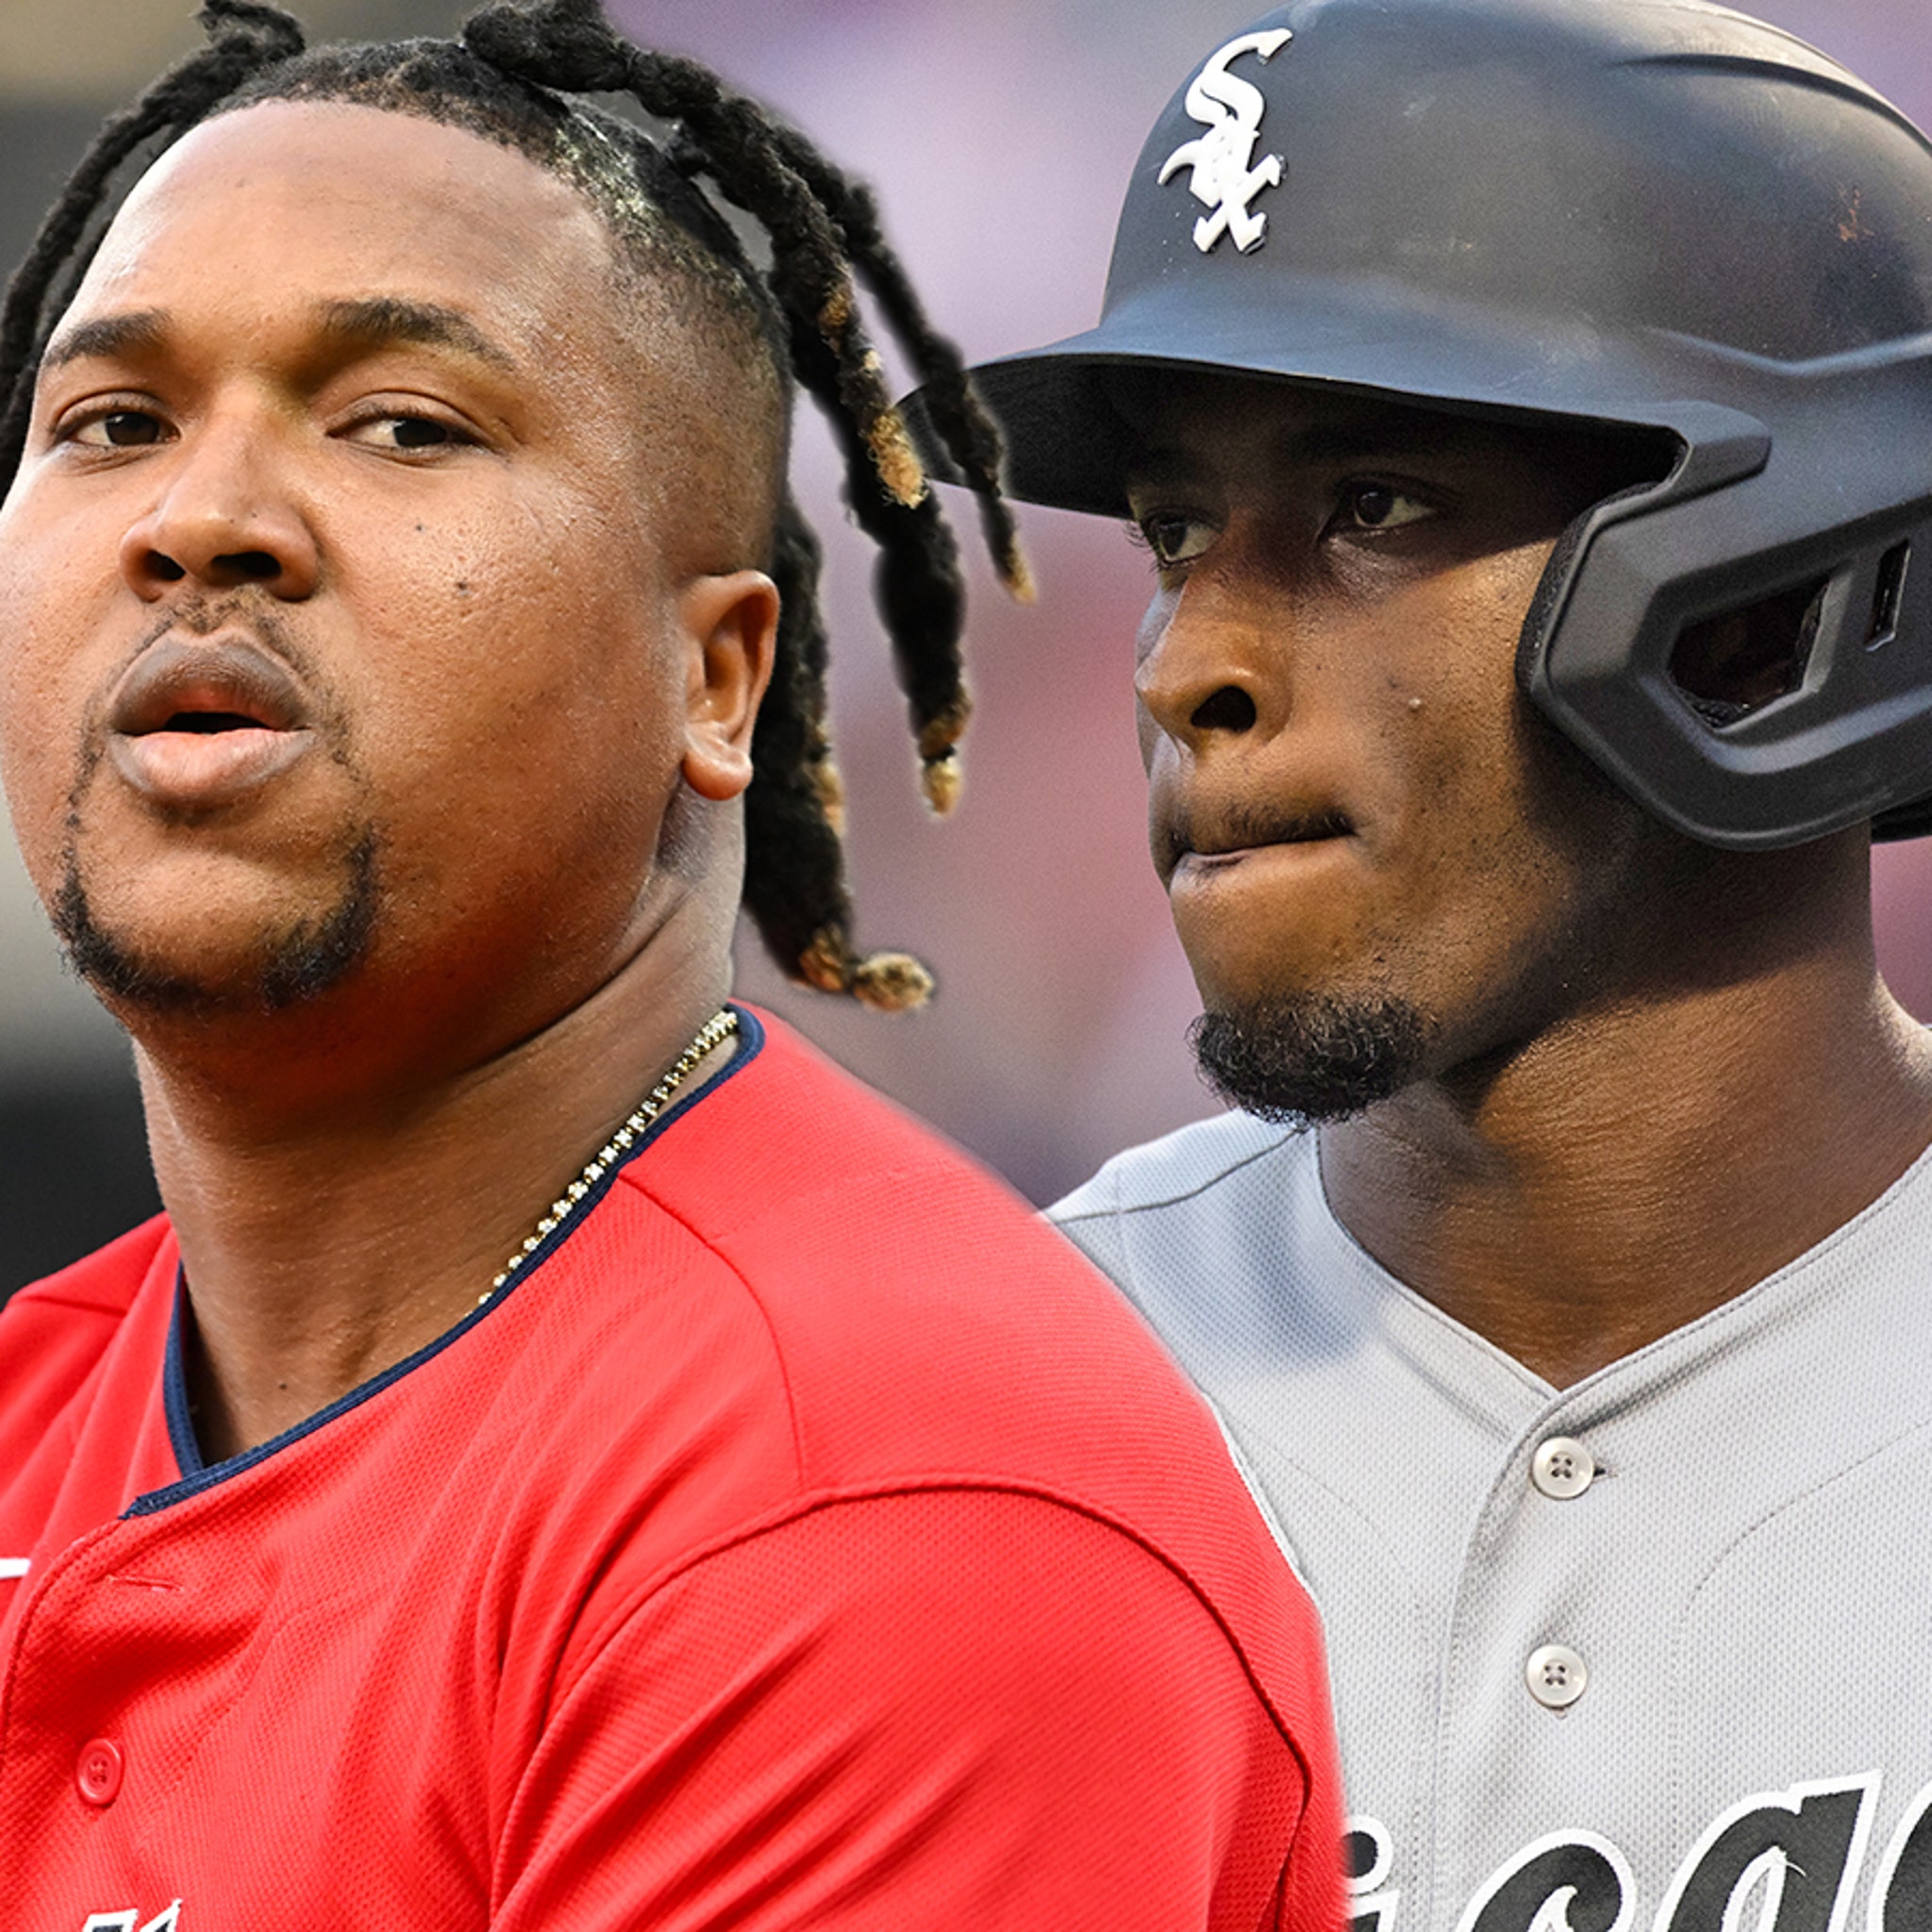 Jose Ramirez Claims Tim Anderson's Ghosting Him After Brawl, Wants To  Apologize